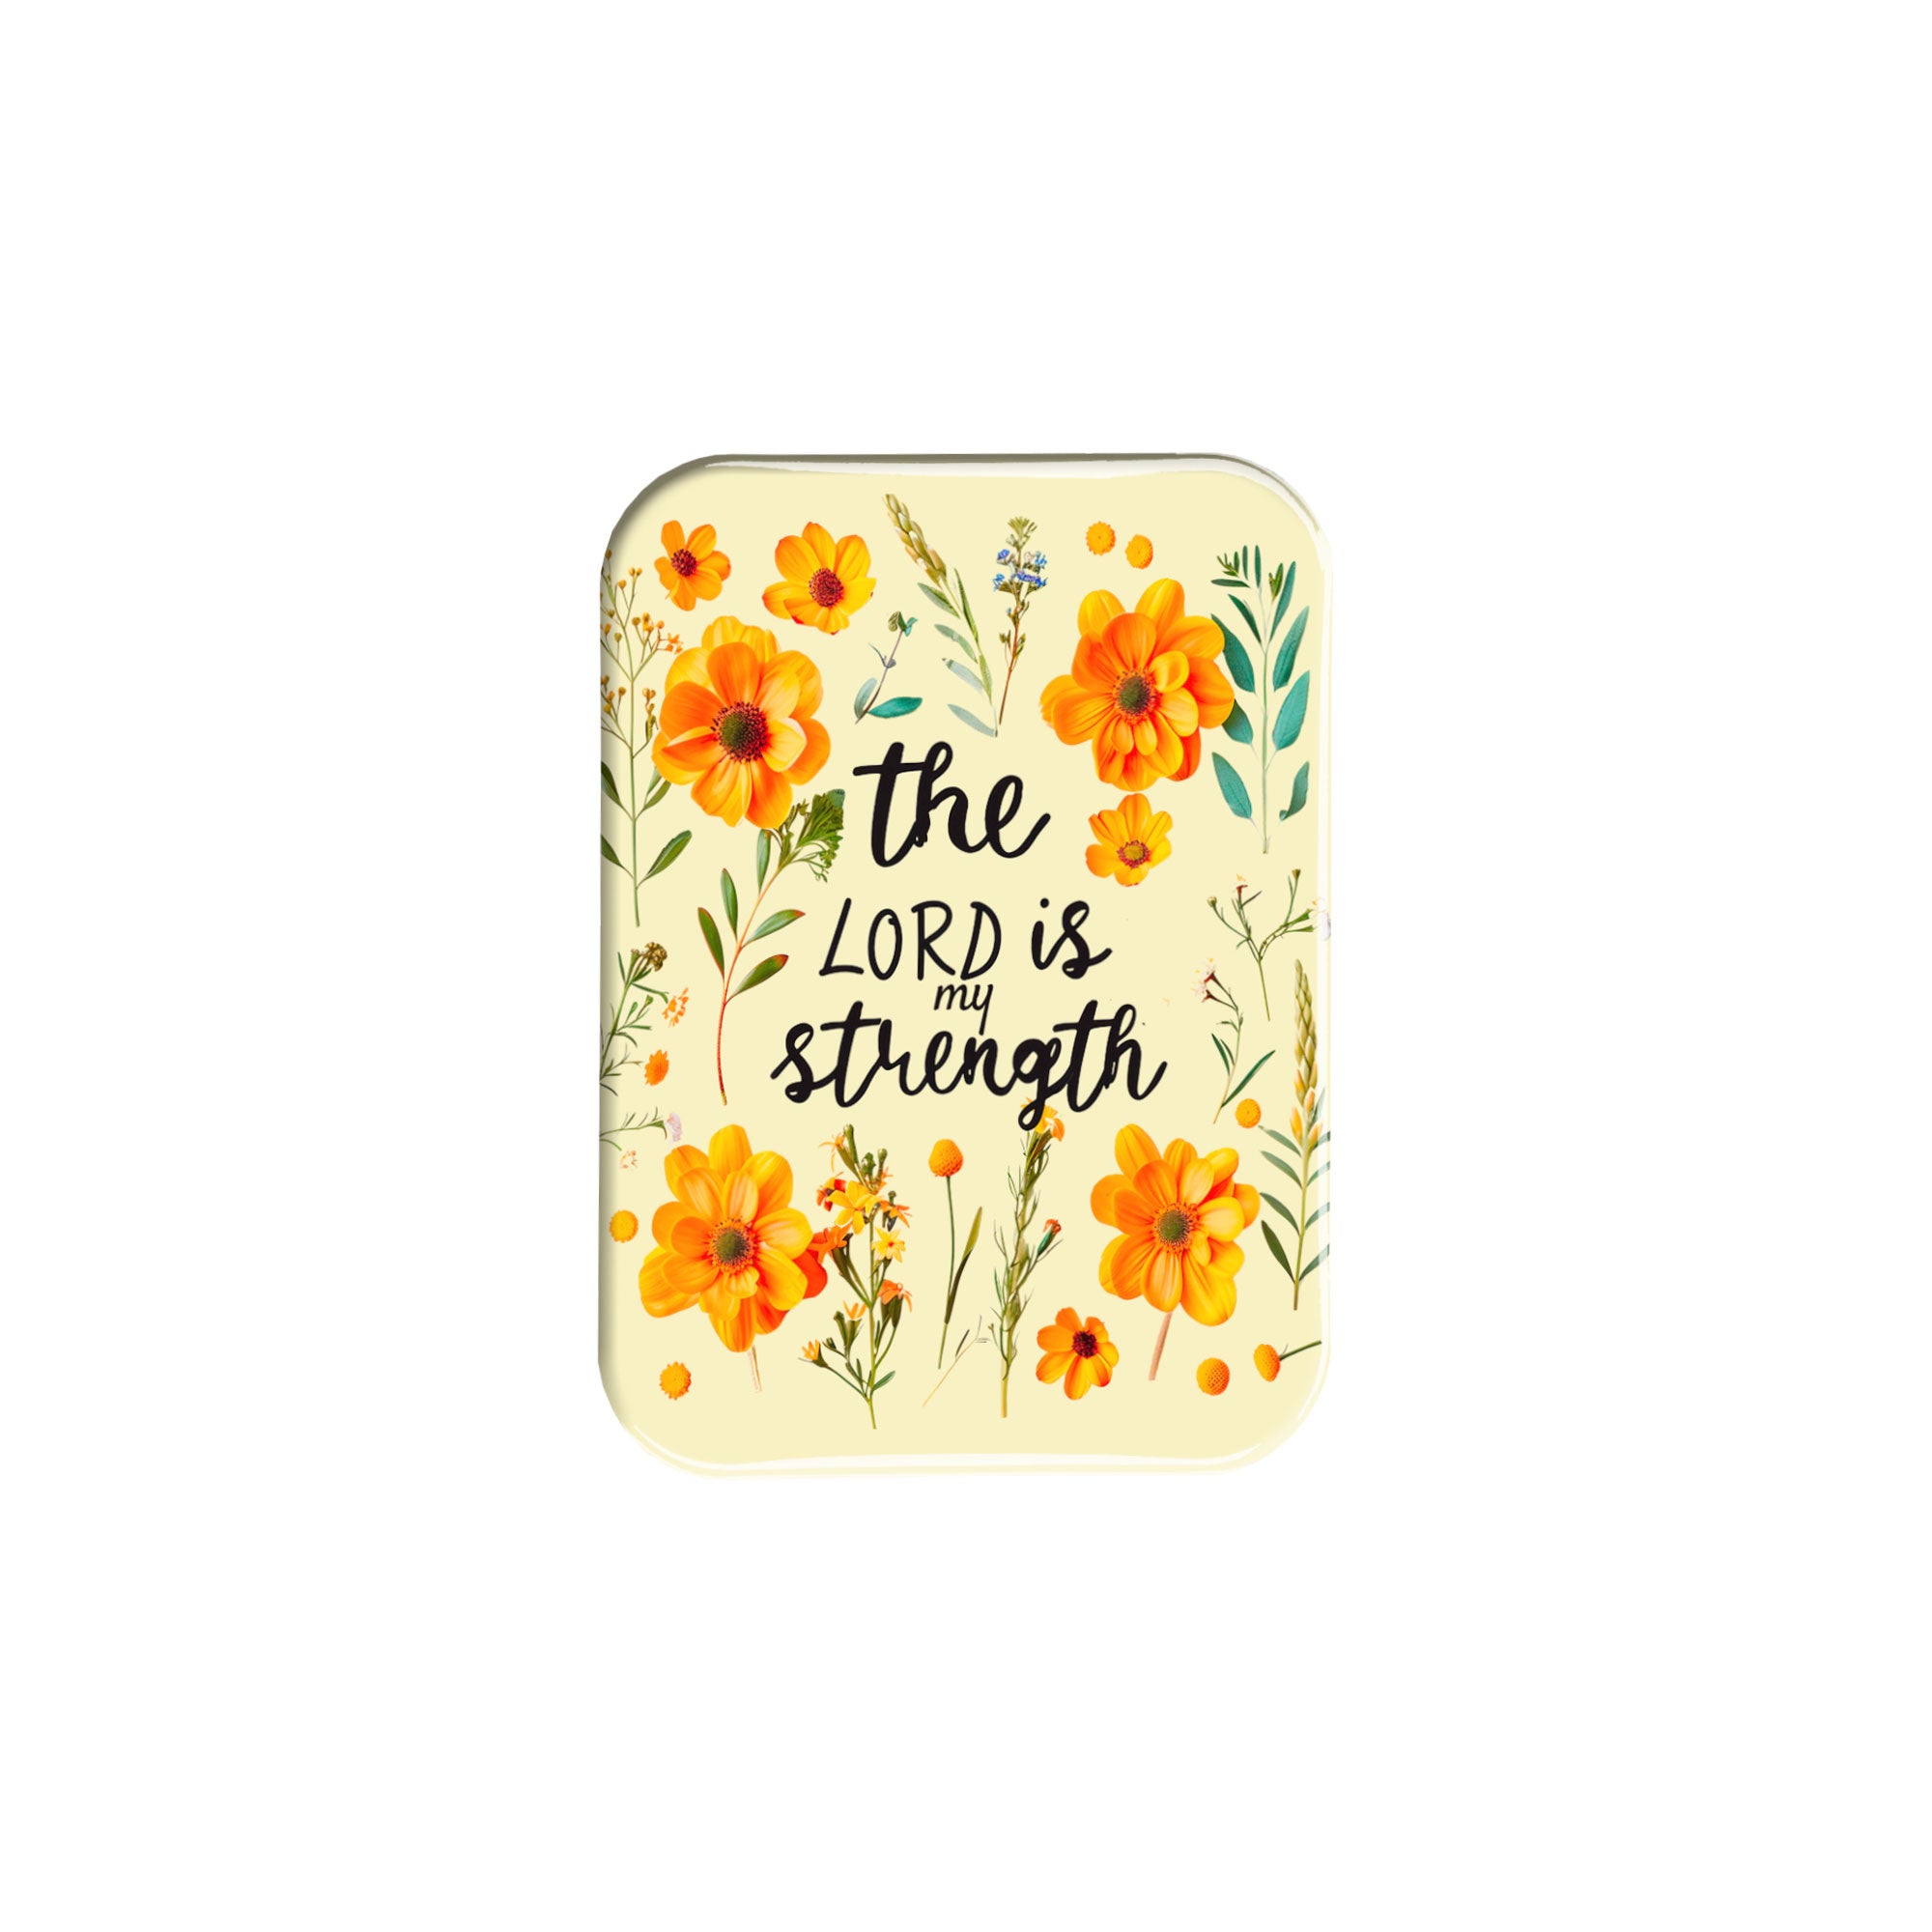 "The Lord is my Strength 2" - 2.5" X 3.5" Rectangle Fridge Magnets